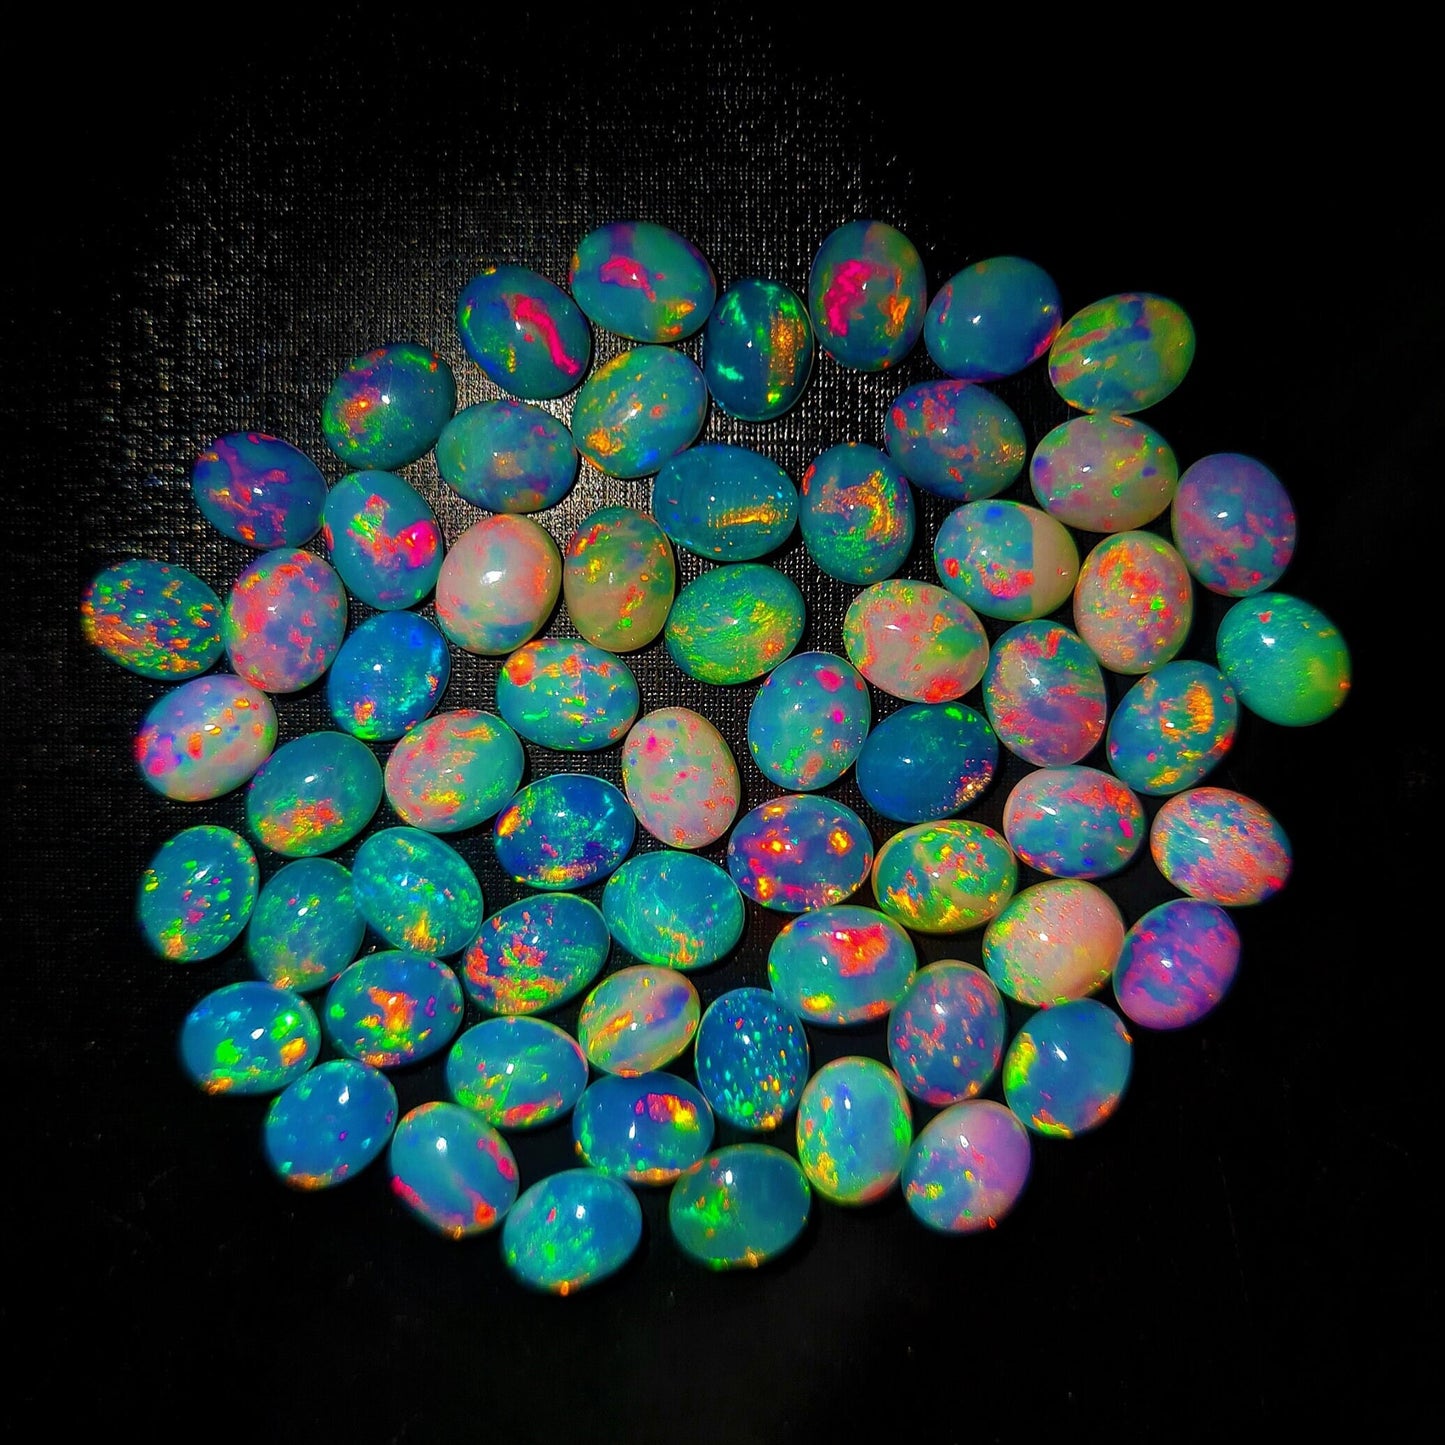 Natural Ethiopian Opal 8x10 mm Oval Gemstone Cabochon, Calibrated Opal Stone, Multi Fire Opal Loose Stone For Jewelry Making.